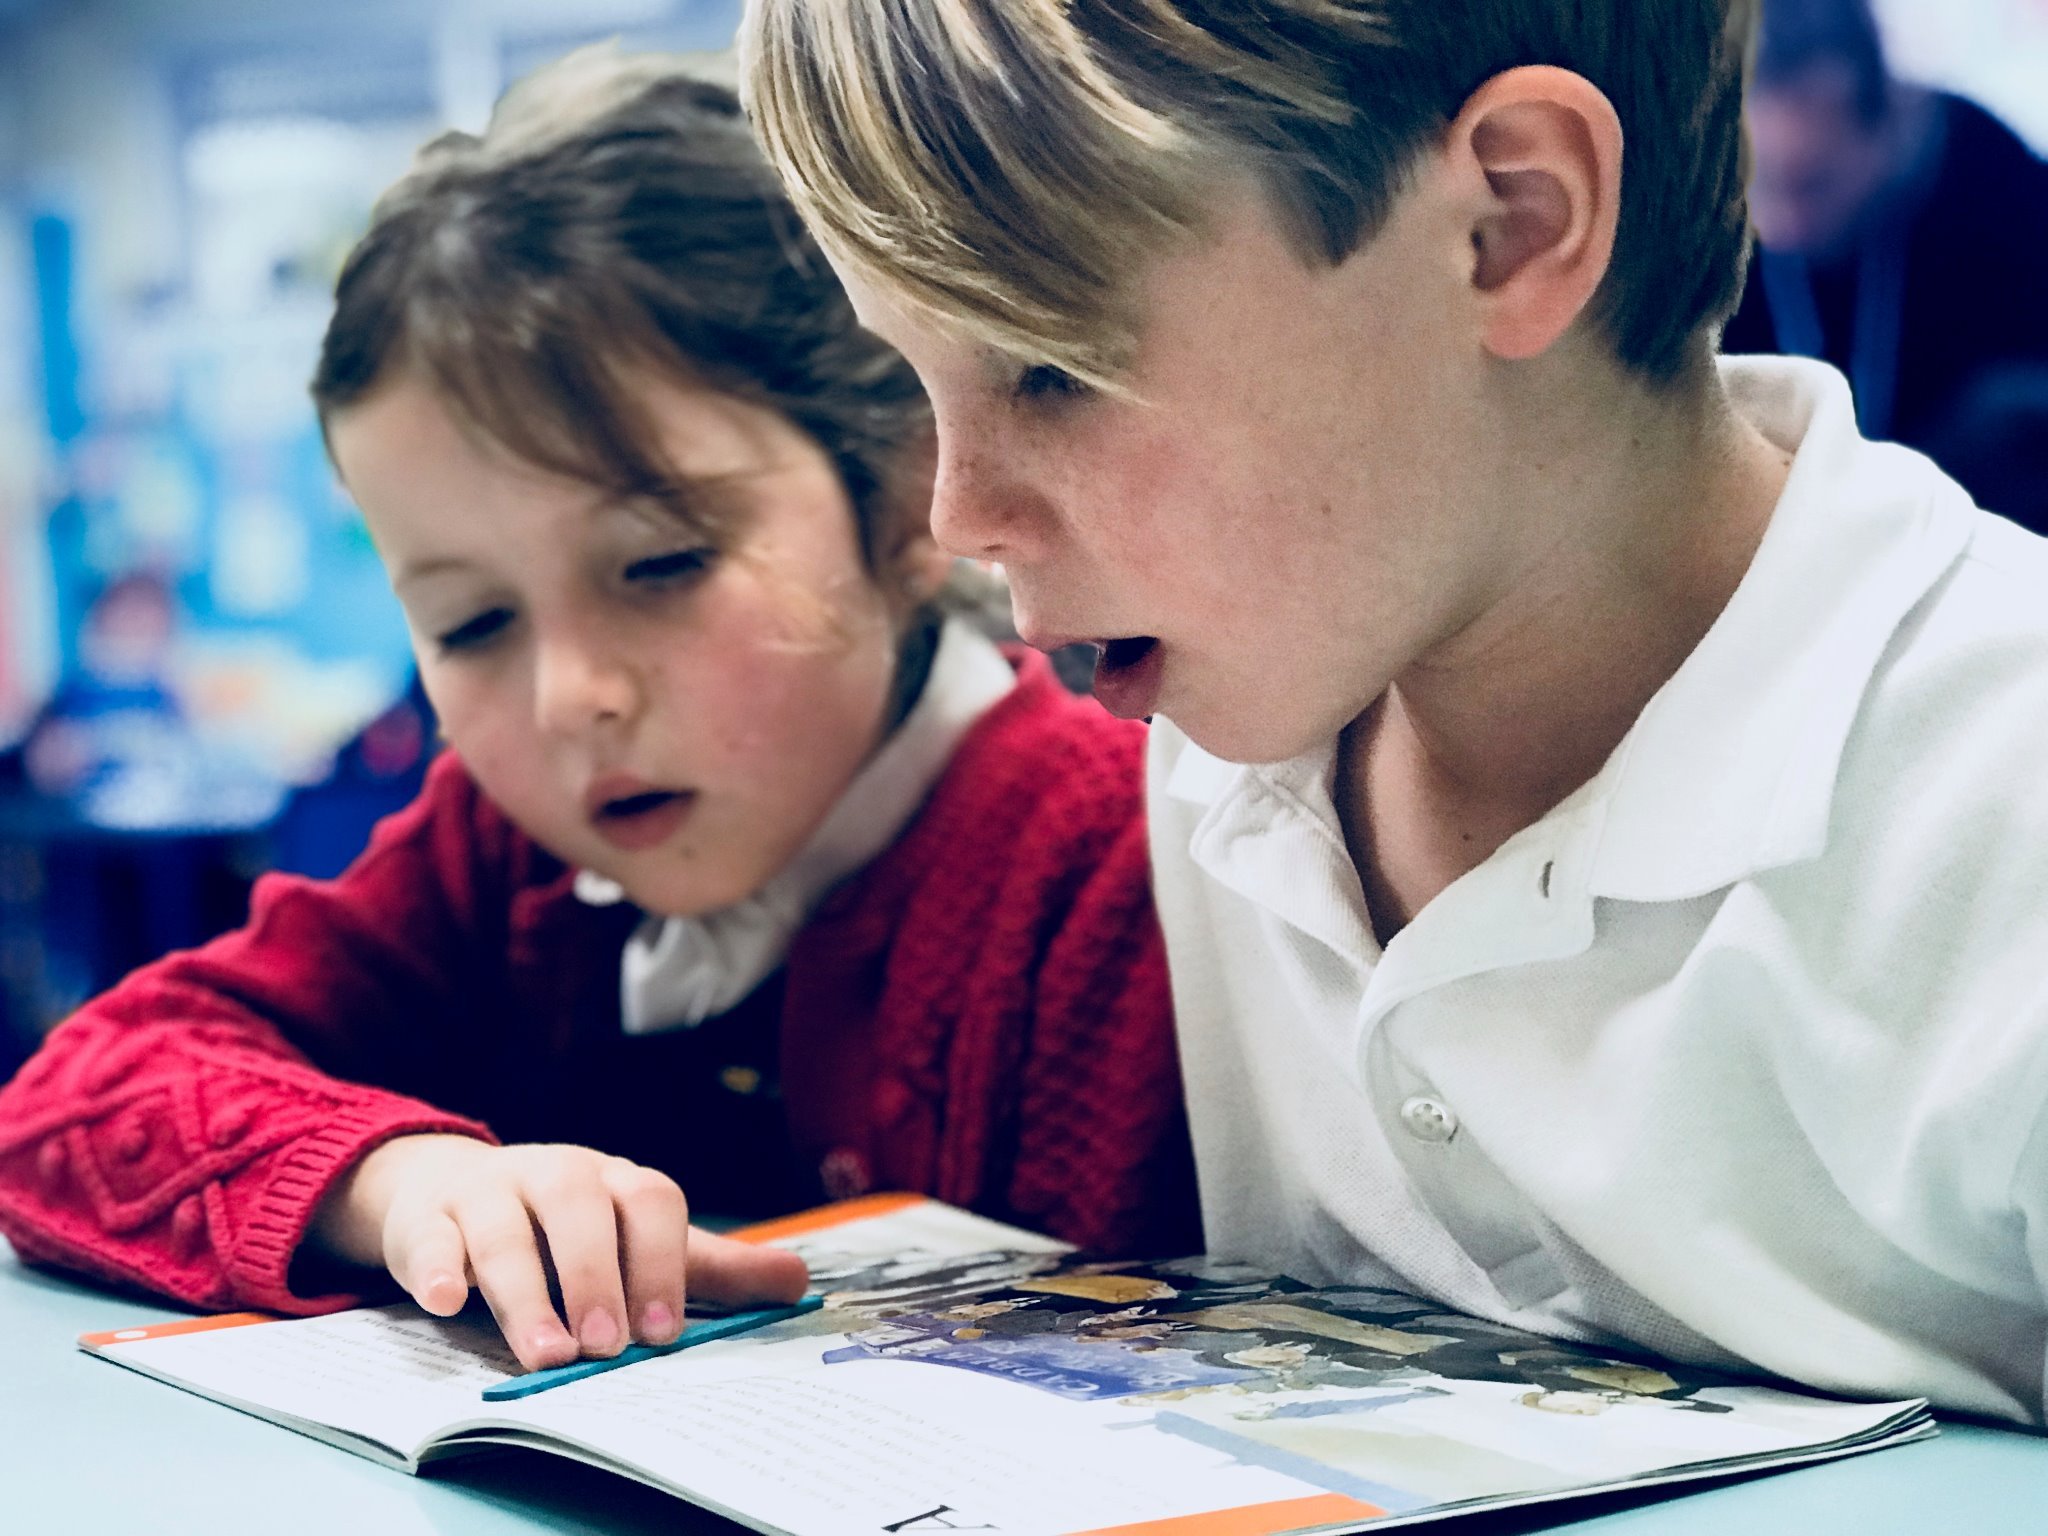 We are passionate about ensuring children receive the very best reading experience from an early age by enabling them to decode, read fluently and love books.